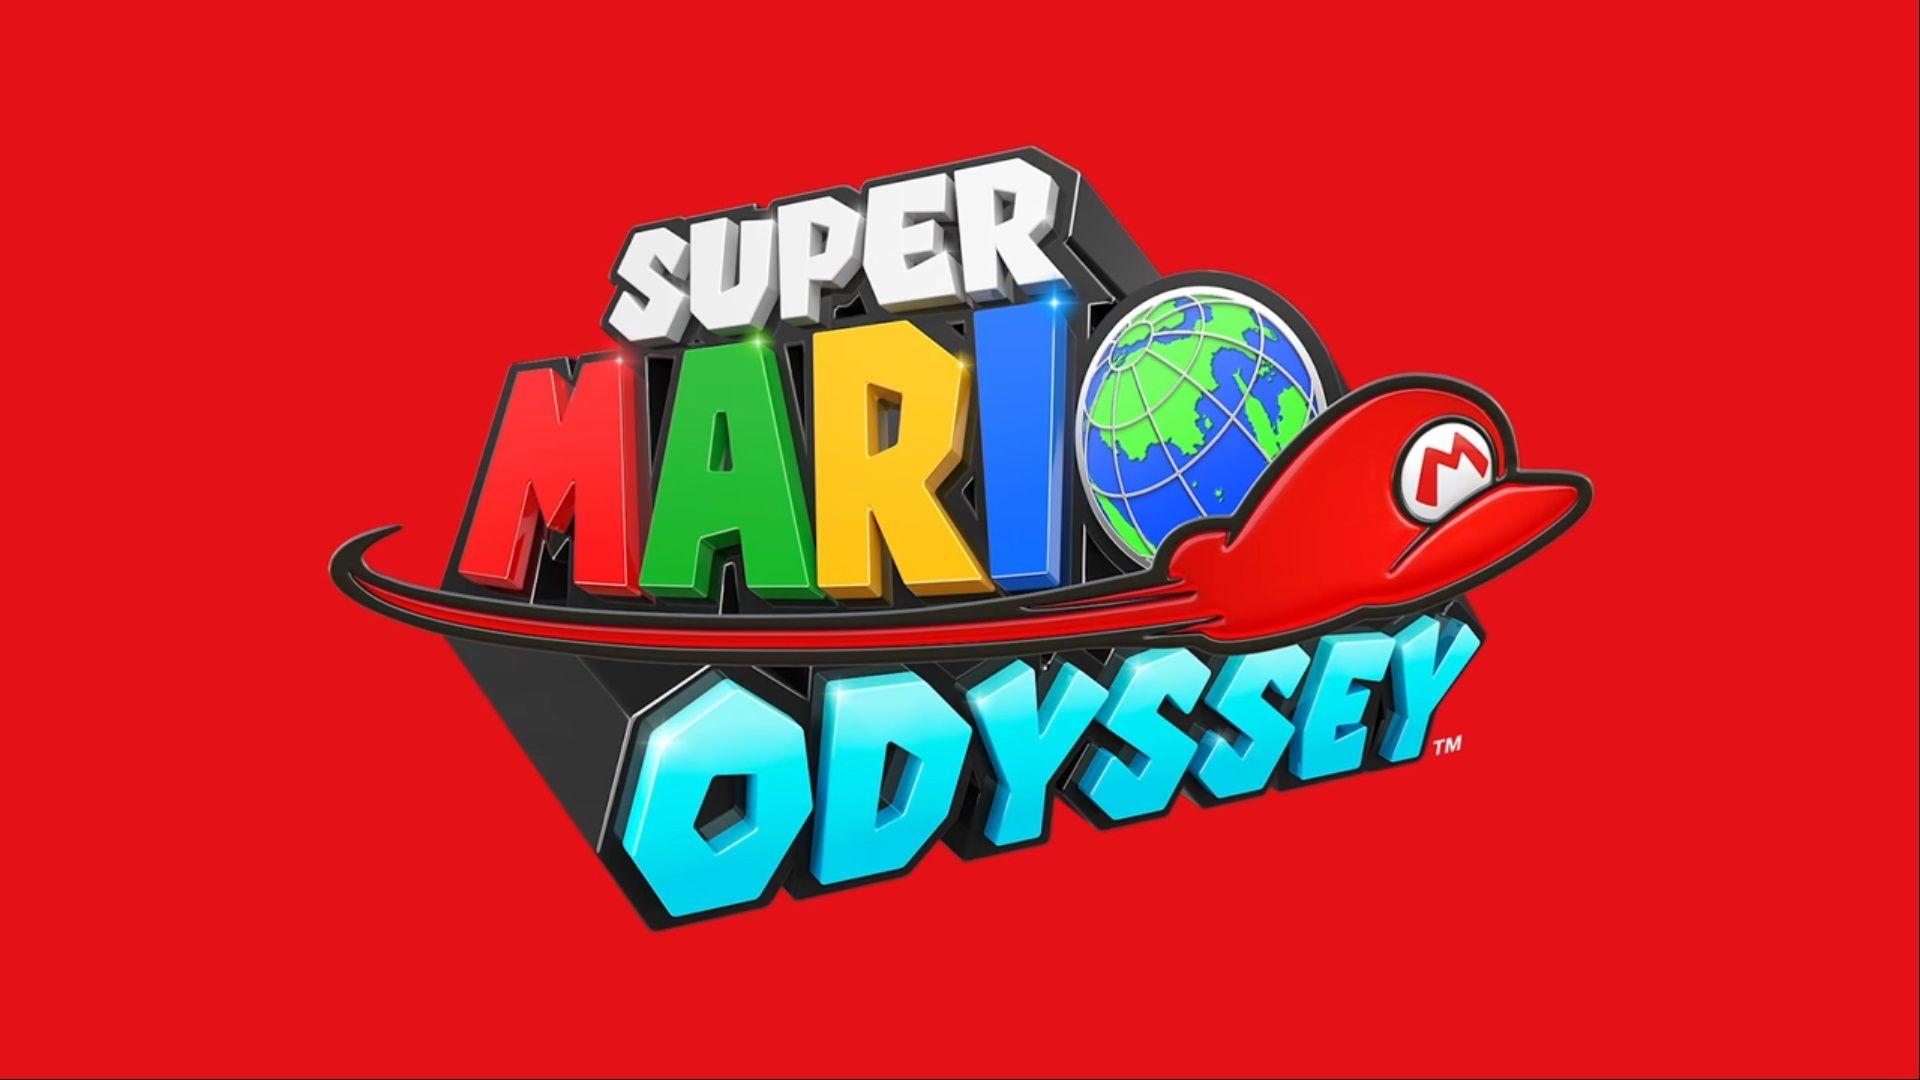 VIDEO: Super Mario Odyssey announced with gameplay trailer